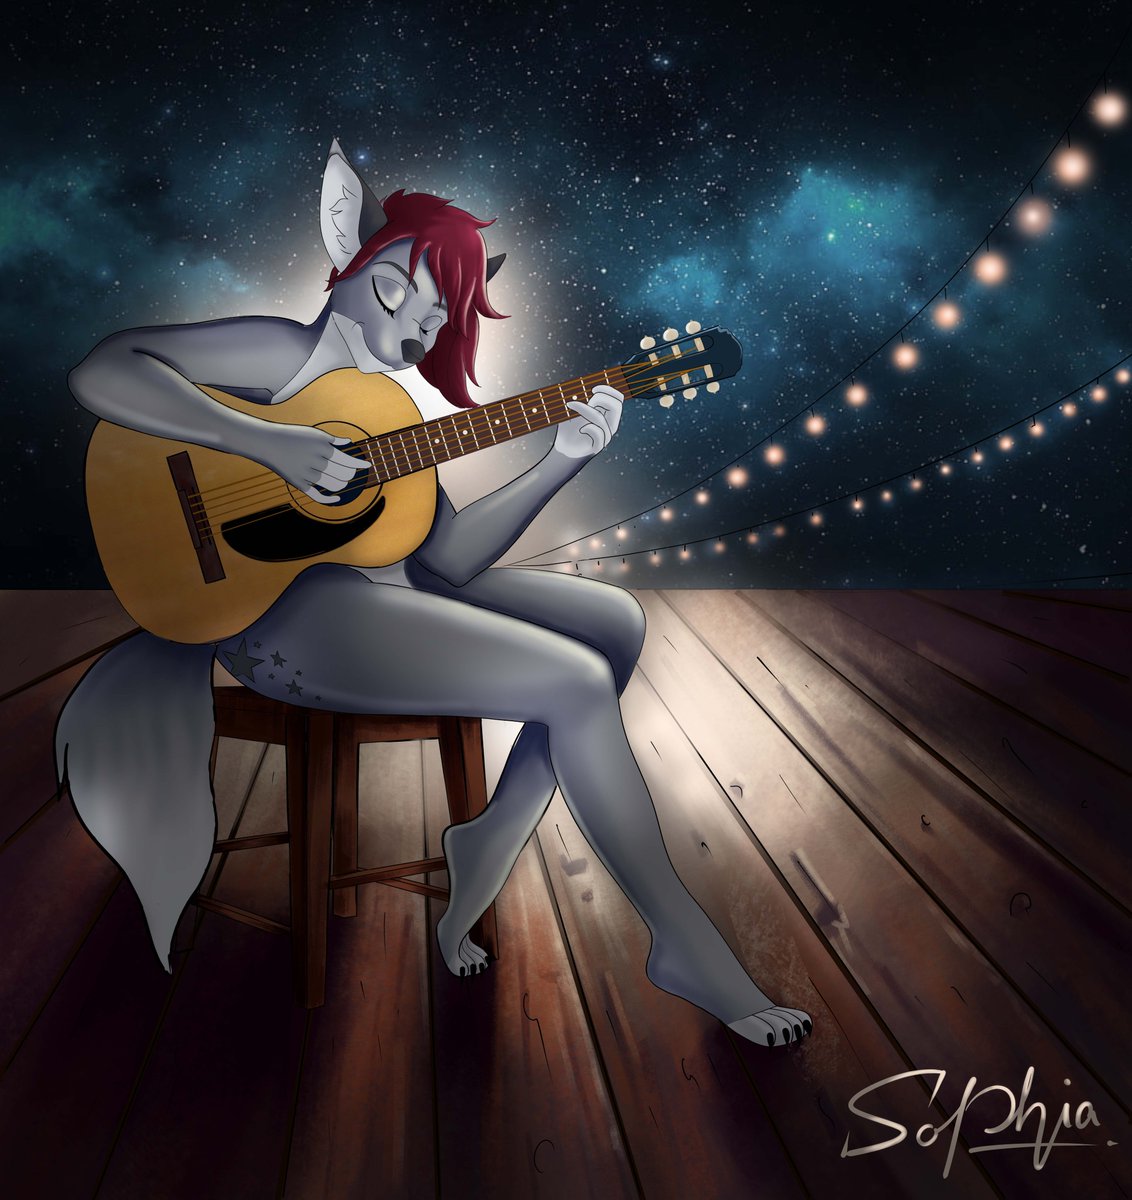 Stardust Melodies! Art by me. #WritersLift Support your favorite authors! Like, retweet & follow everyone on this thread! #ShamelessSelfPromoWednesday #WritingCommunity #authorcommunity #BooksWorthReading #booktwt! Share whatever you have - #links, #books, #blogs